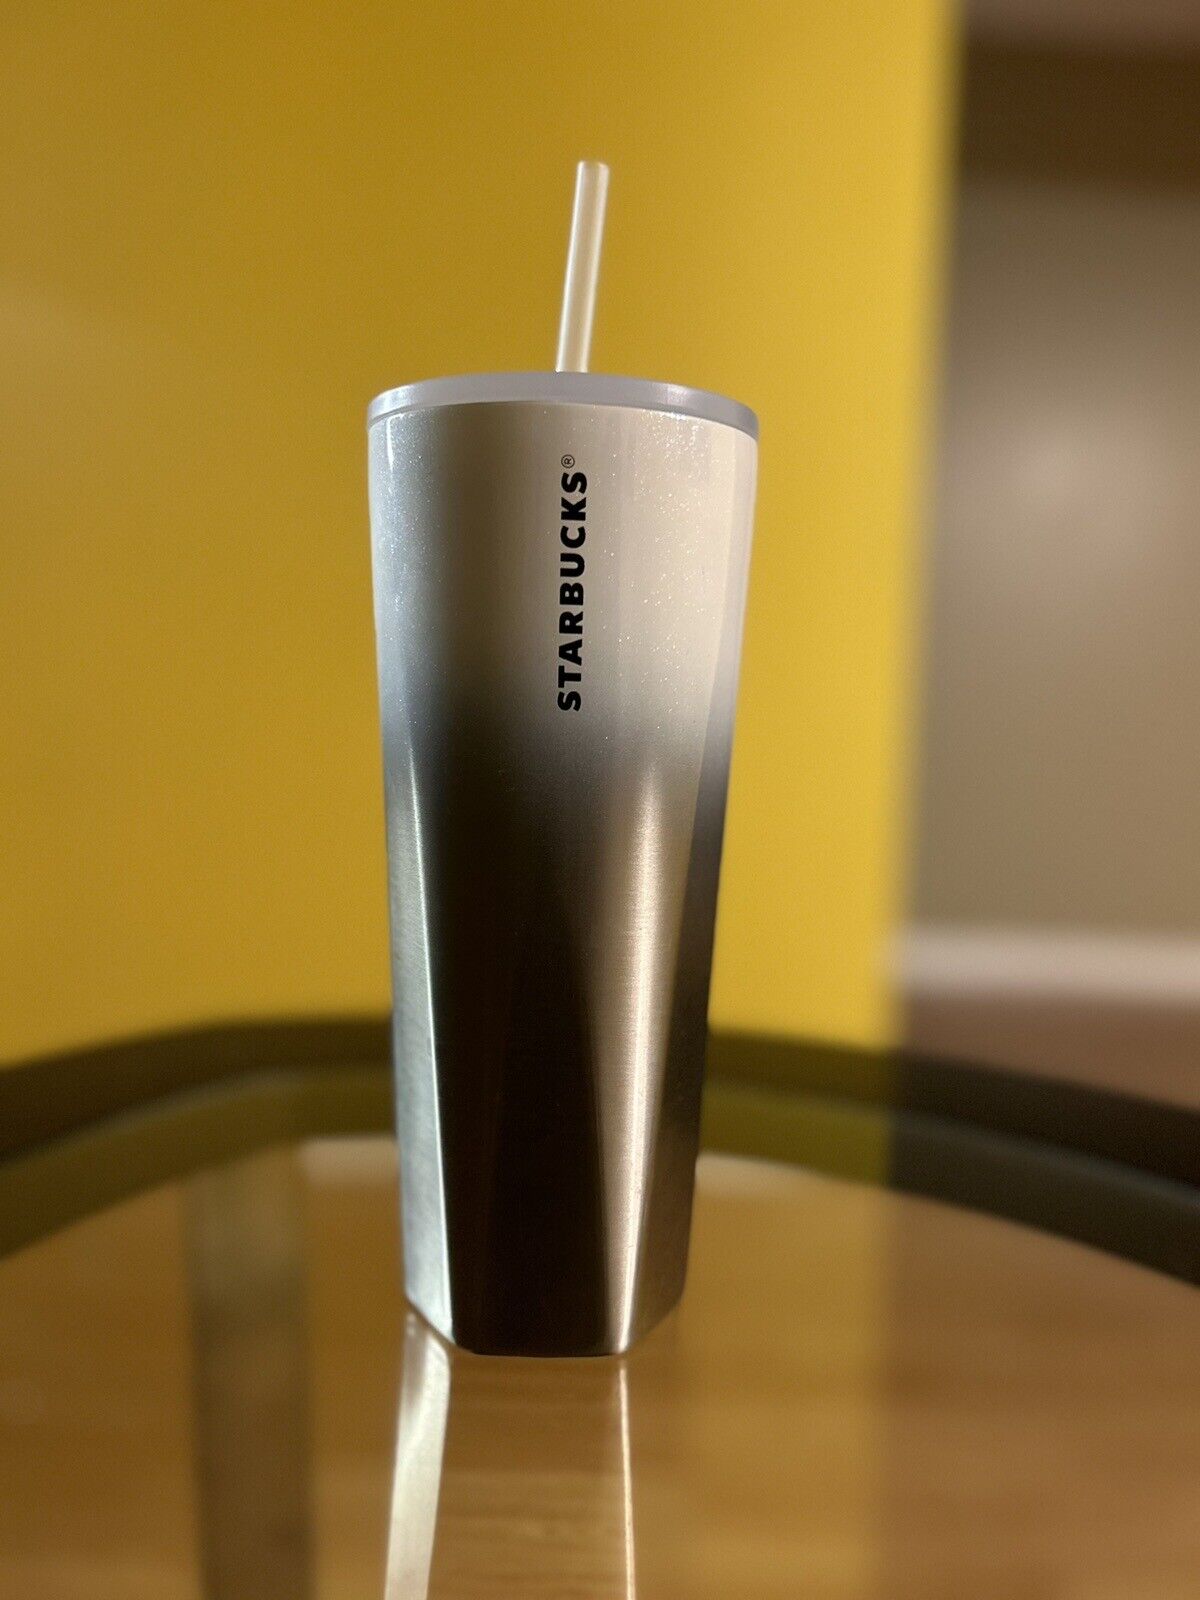 Starbucks Ombré Gray And White Stainless Steel Tumbler Cup